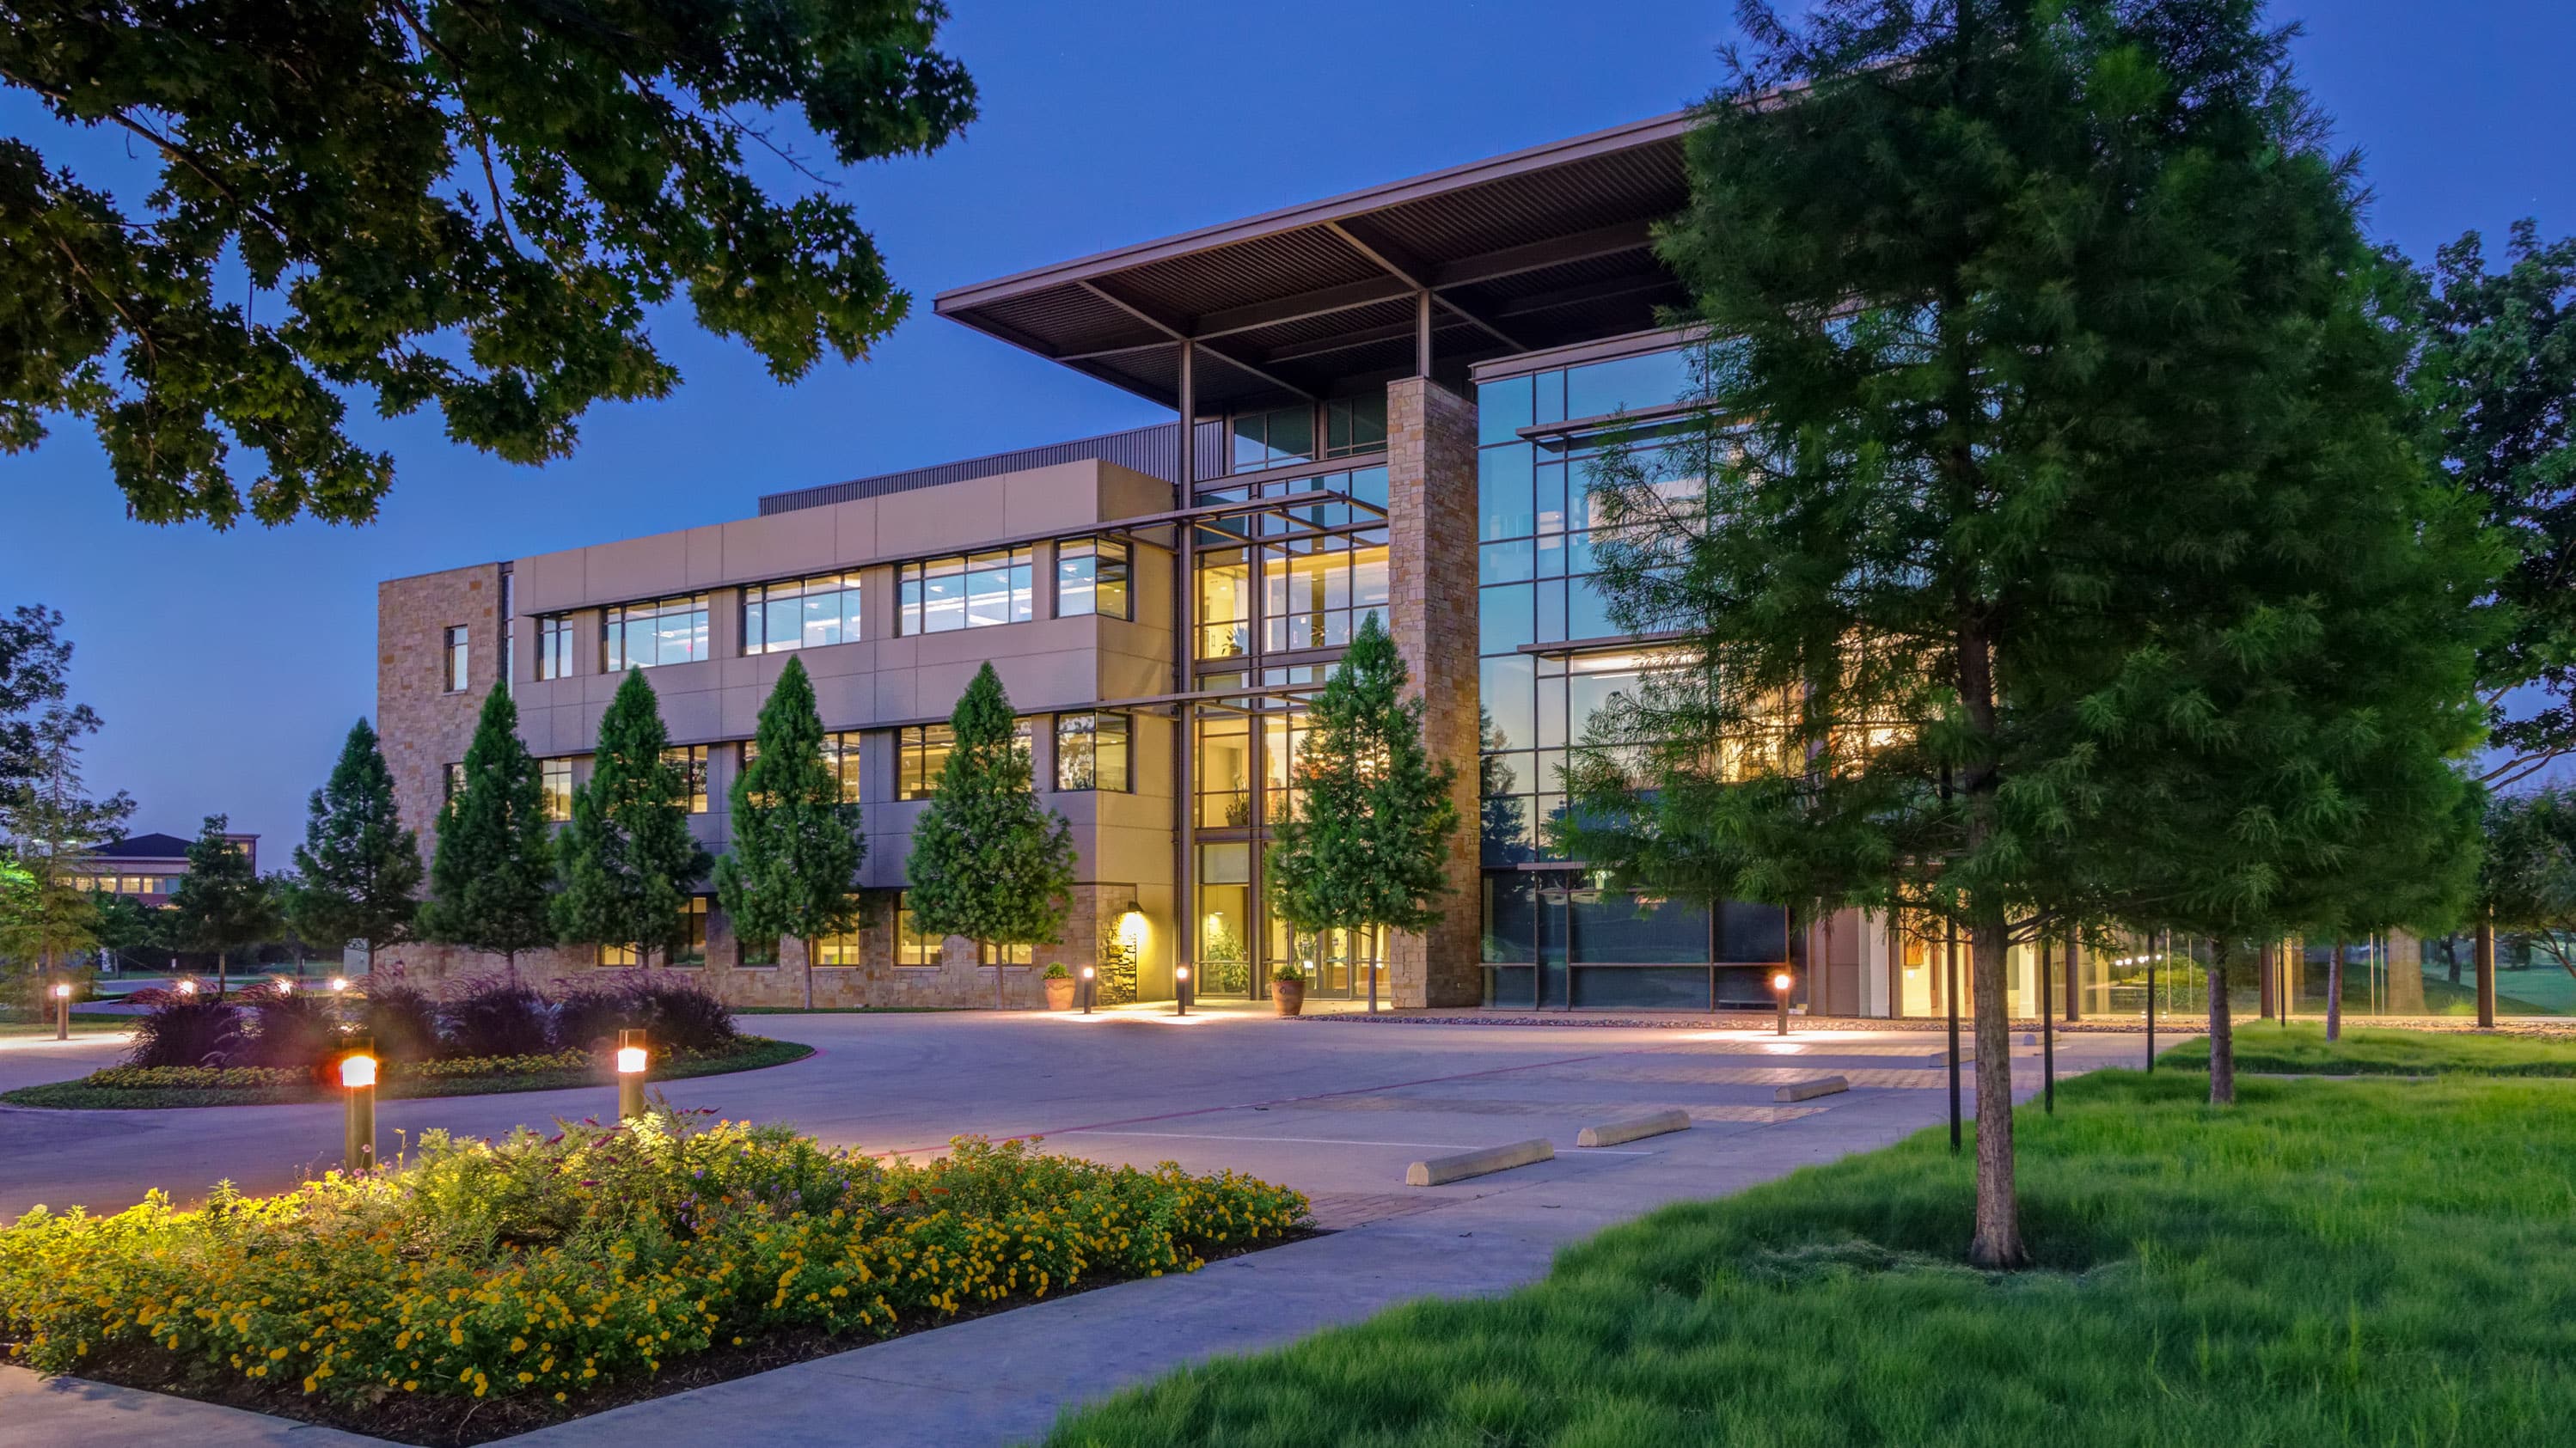 Evening shot of a modern corporate building in Texas with a custom landscape landscape design with outdoor lighting shining on the building, plants & trees.